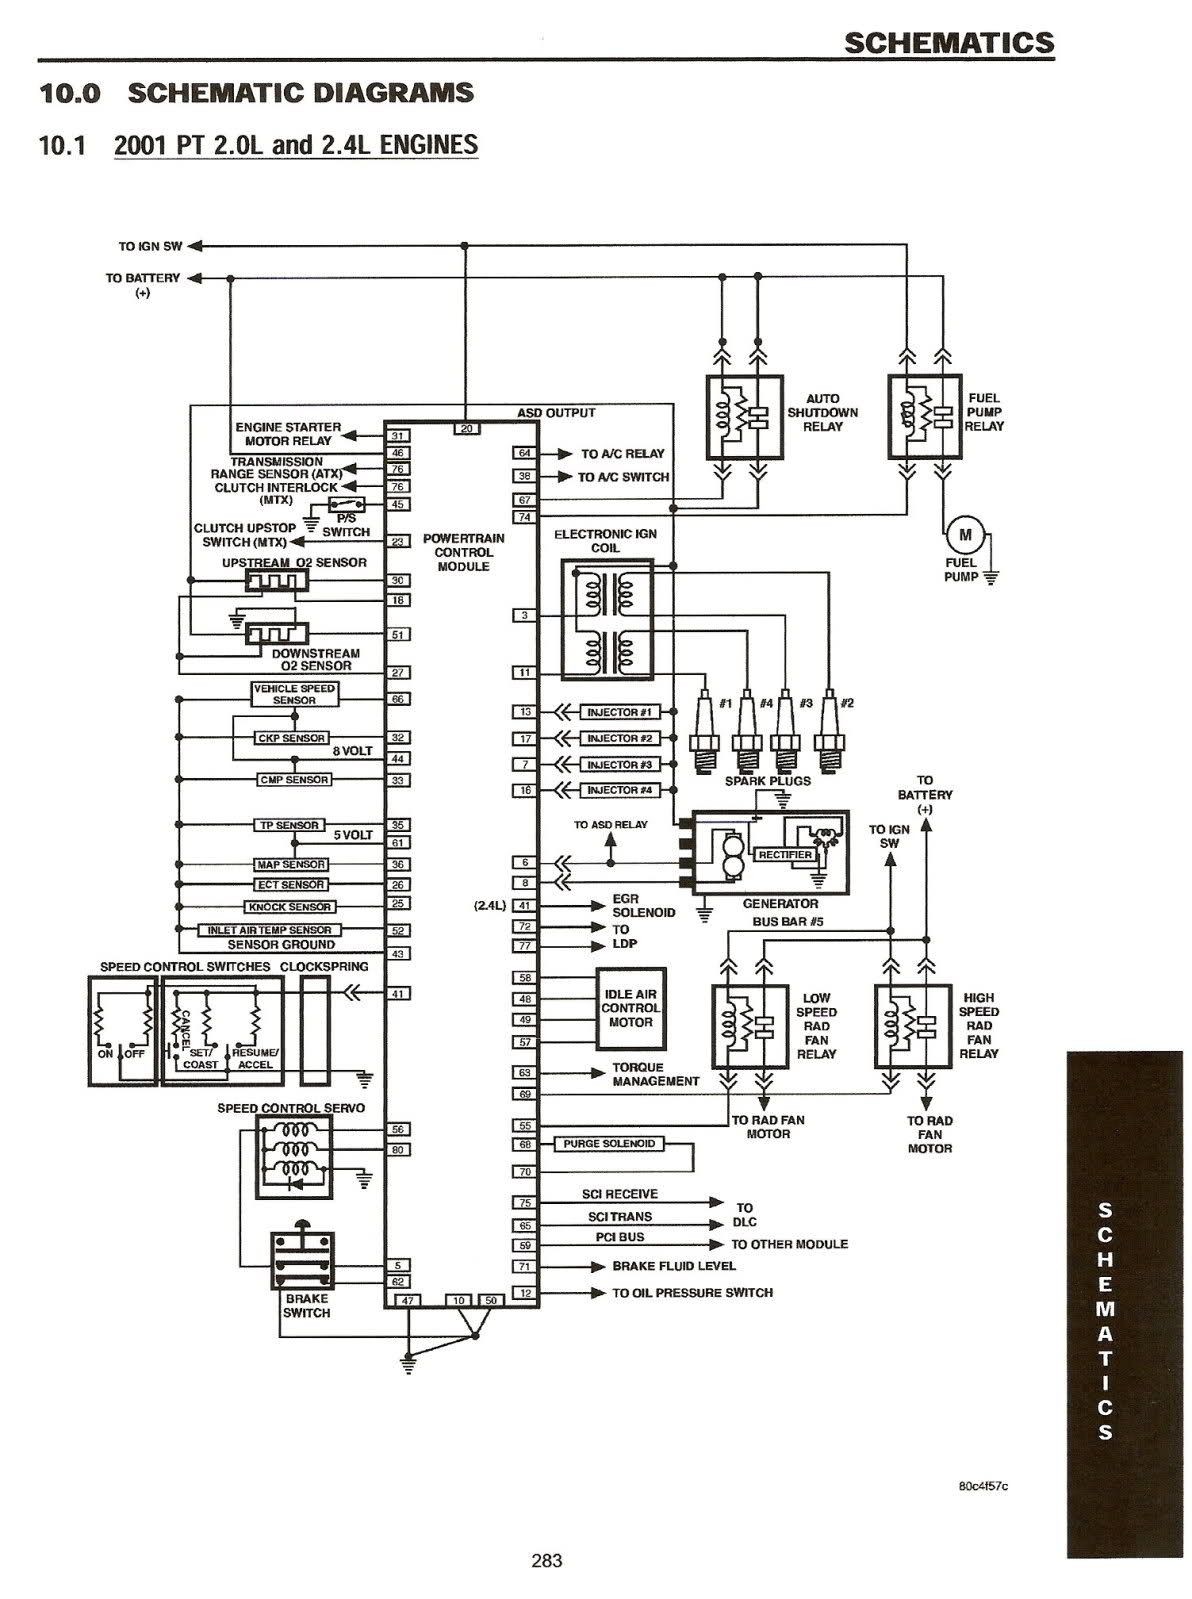 2007 pt cruiser wiring diagram Collection for a larger view 17 f